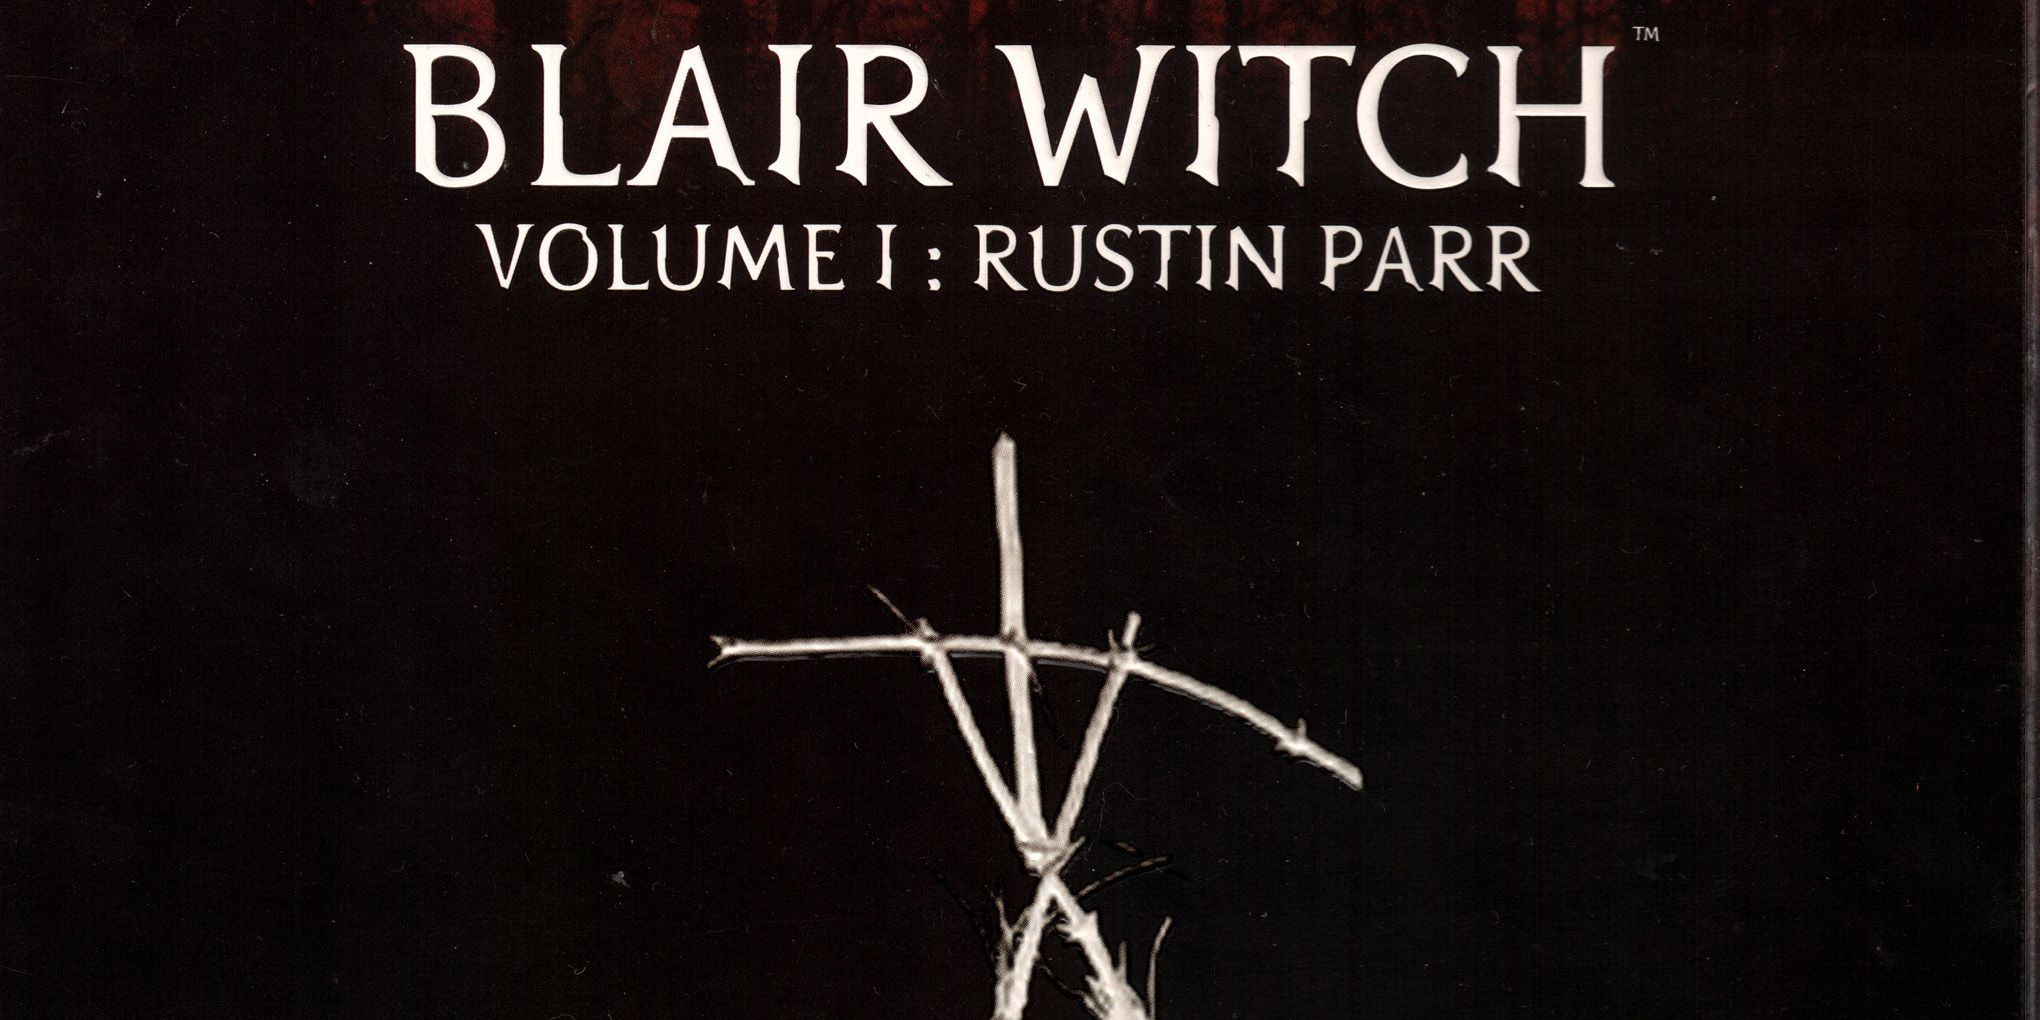 Blair Witch Volume 1: Rustin Parr Video Game